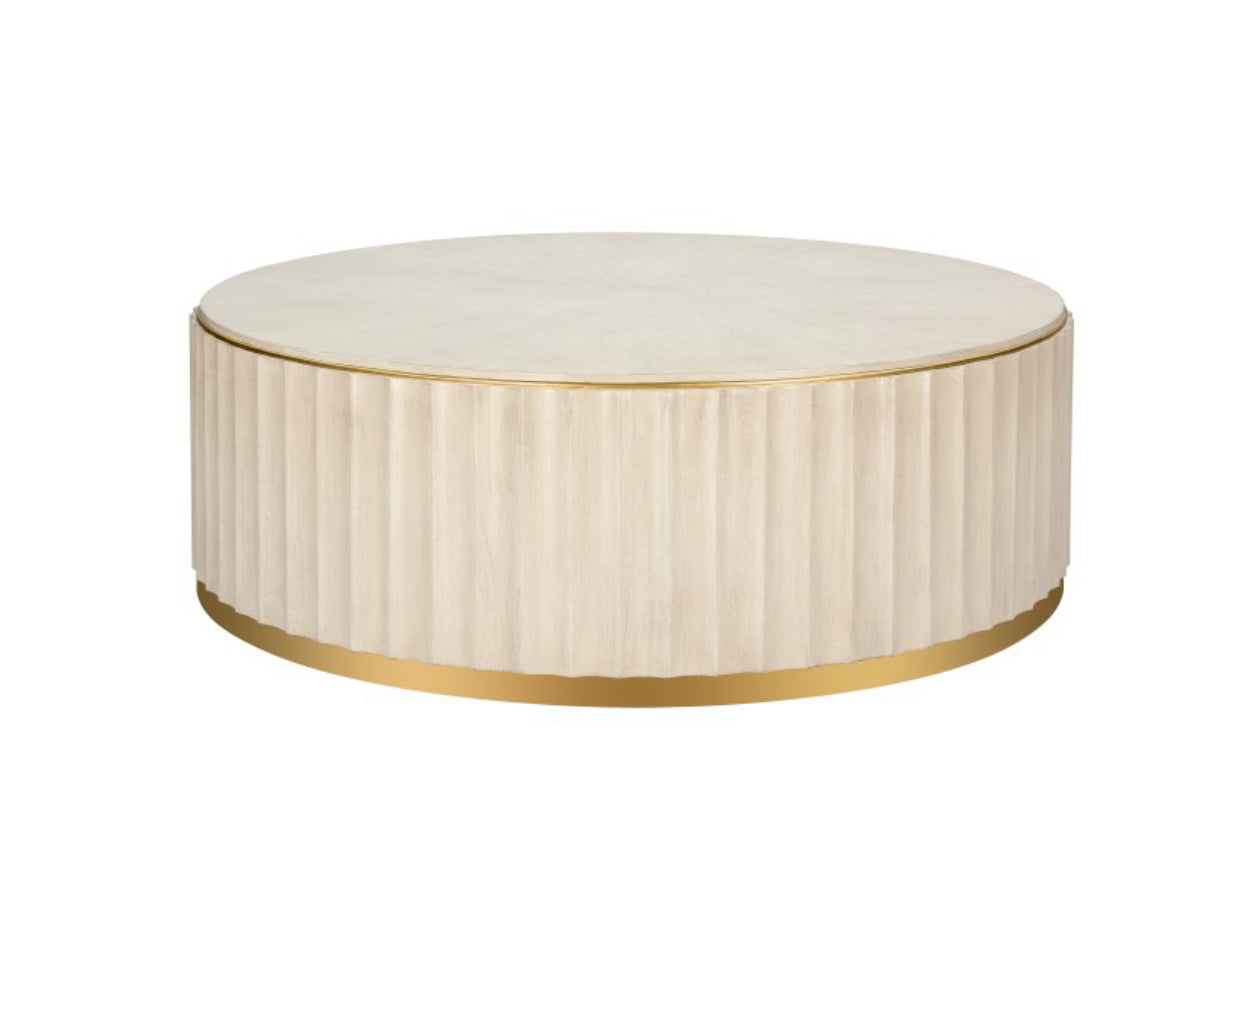 The Apollo Coffee Table is a study in refined simplicity. A low round drum shape features a bleached wood vertical fluted detail around the body. A brass plinth base and edging around the tabletop adds elegance.  Primary Color/FinishBleached Secondary Color/FinishBrass Primary MaterialWood Primary Material Sub StyleAsh Wood Secondary MaterialMetal Secondary Material Sub StyleStainless Steel Item Width51 Item Depth51 Item Height17.25 Item Weight153 